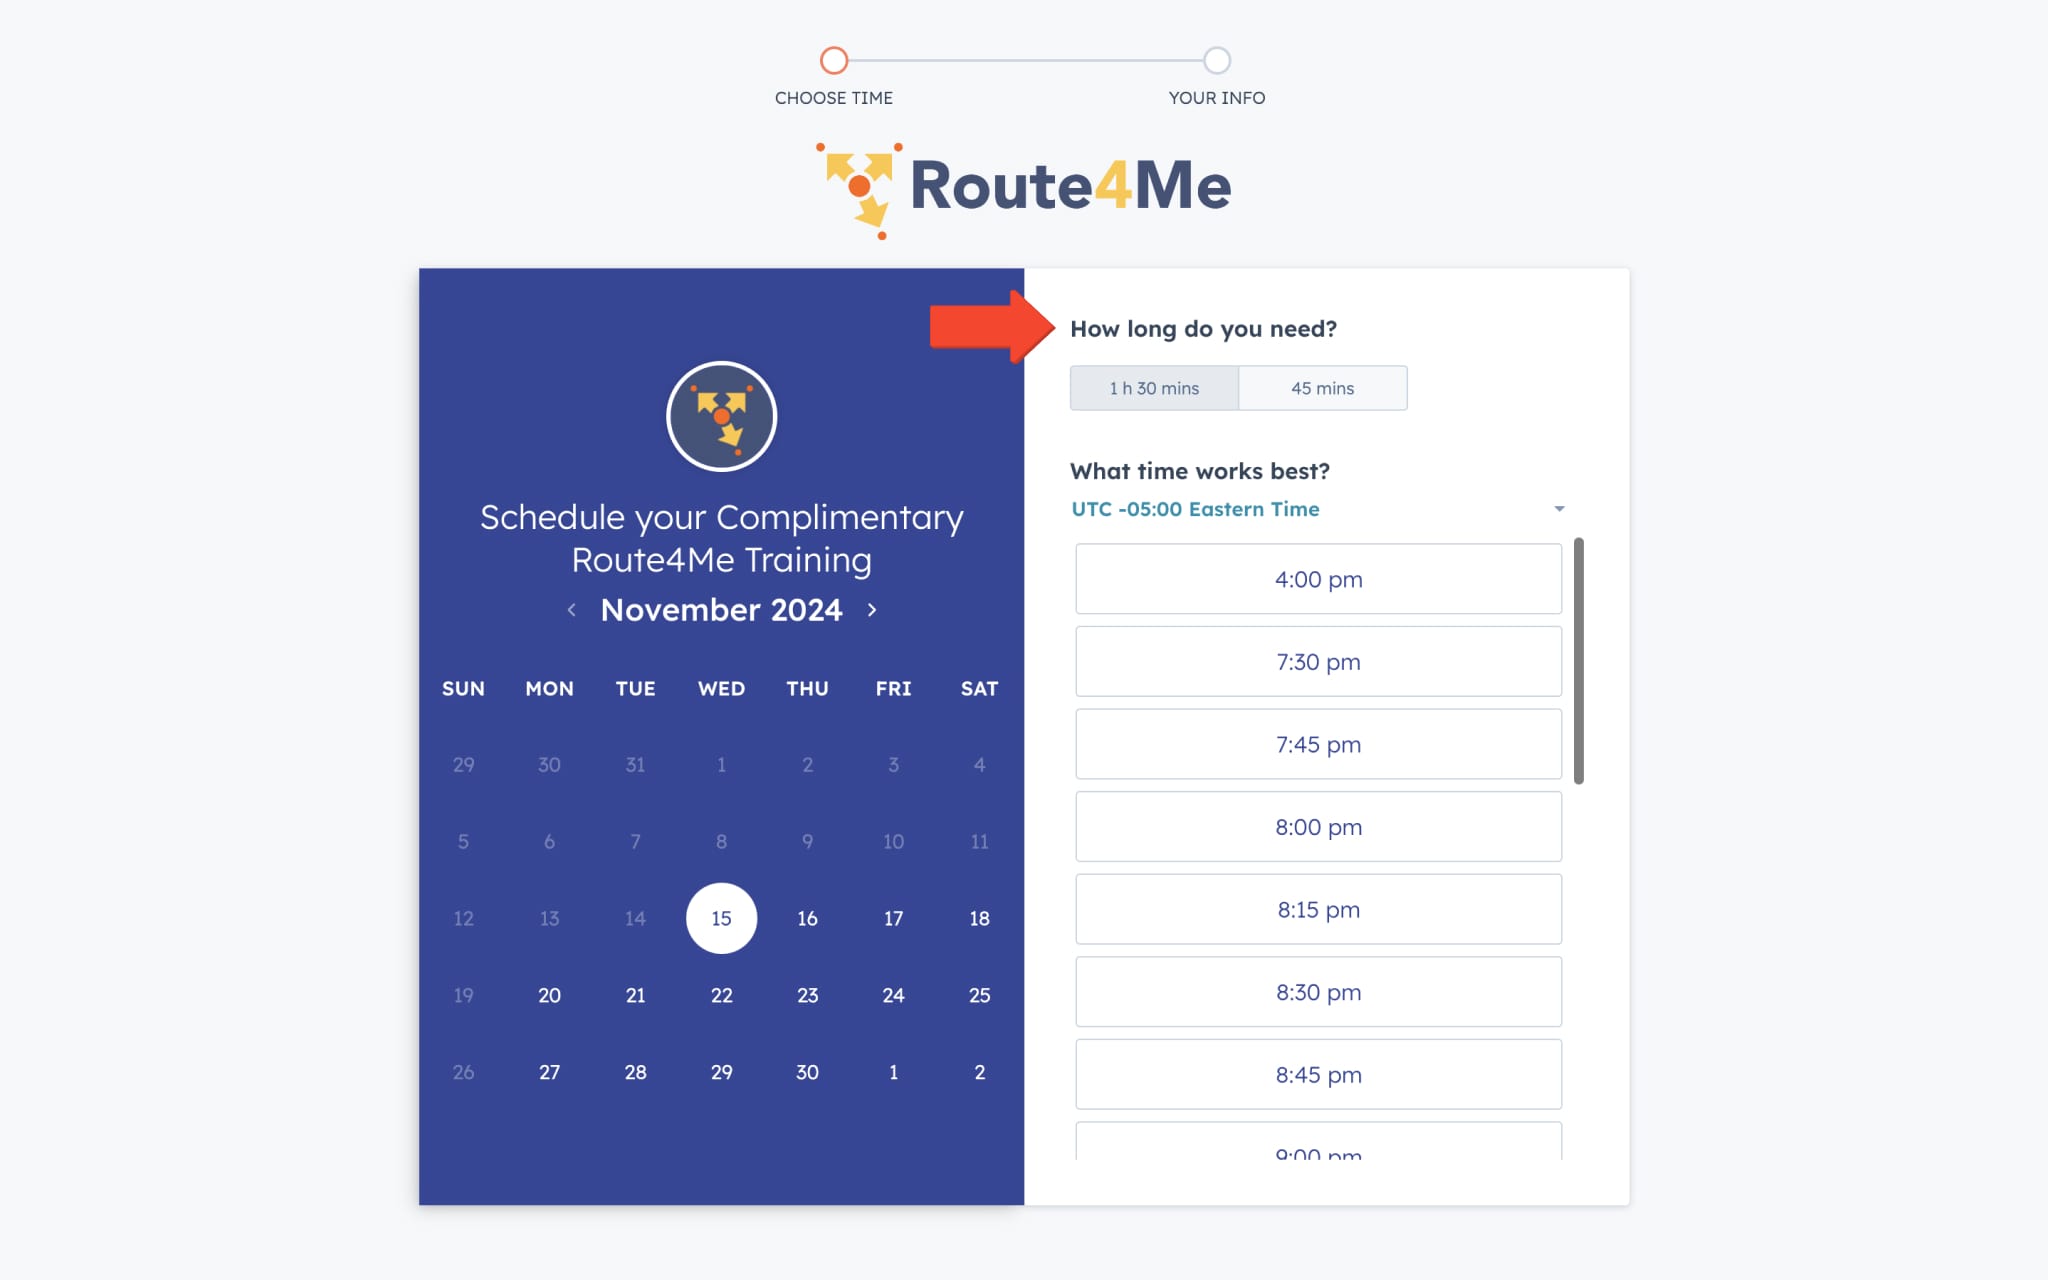 Select the preferred Route4Me Onboarding Training Session duration time.